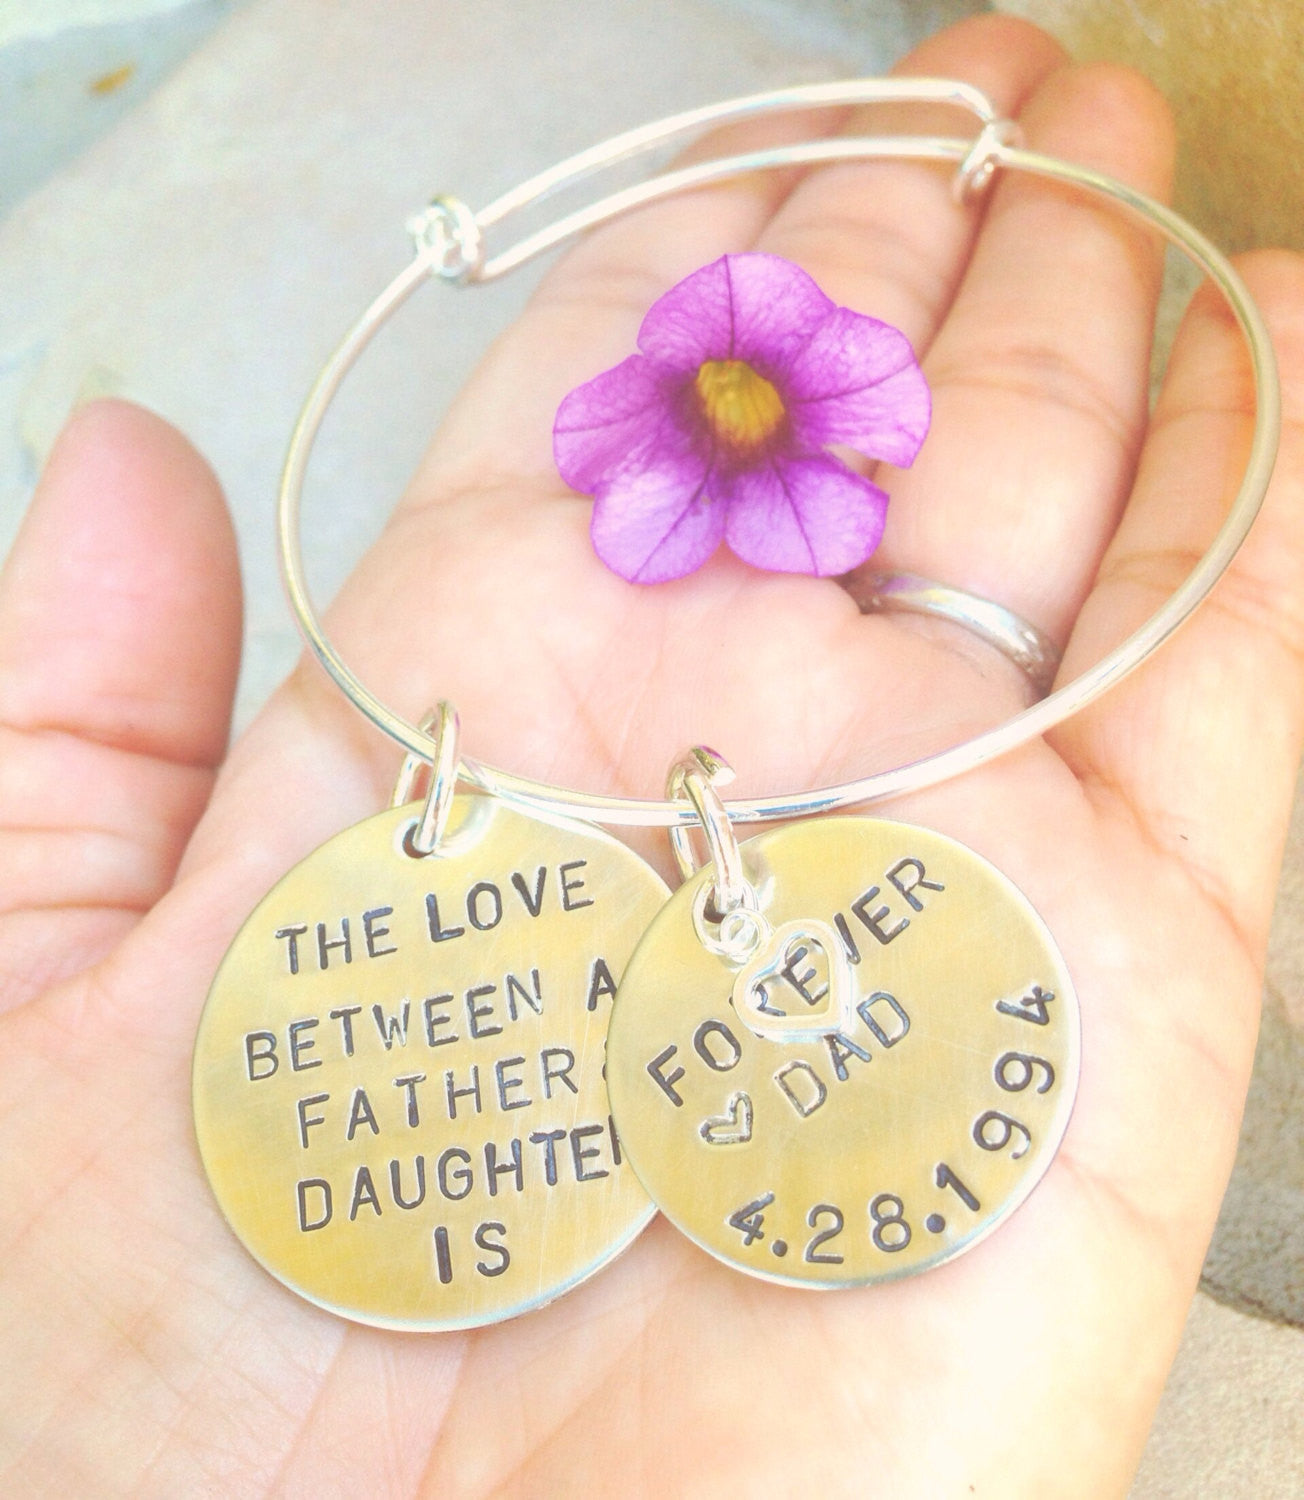 The Love Between A Father And Daughter Bangle Bracelet, Father Daughter Jewelry Gifts - Natashaaloha, jewelry, bracelets, necklace, keychains, fishing lures, gifts for men, charms, personalized, 